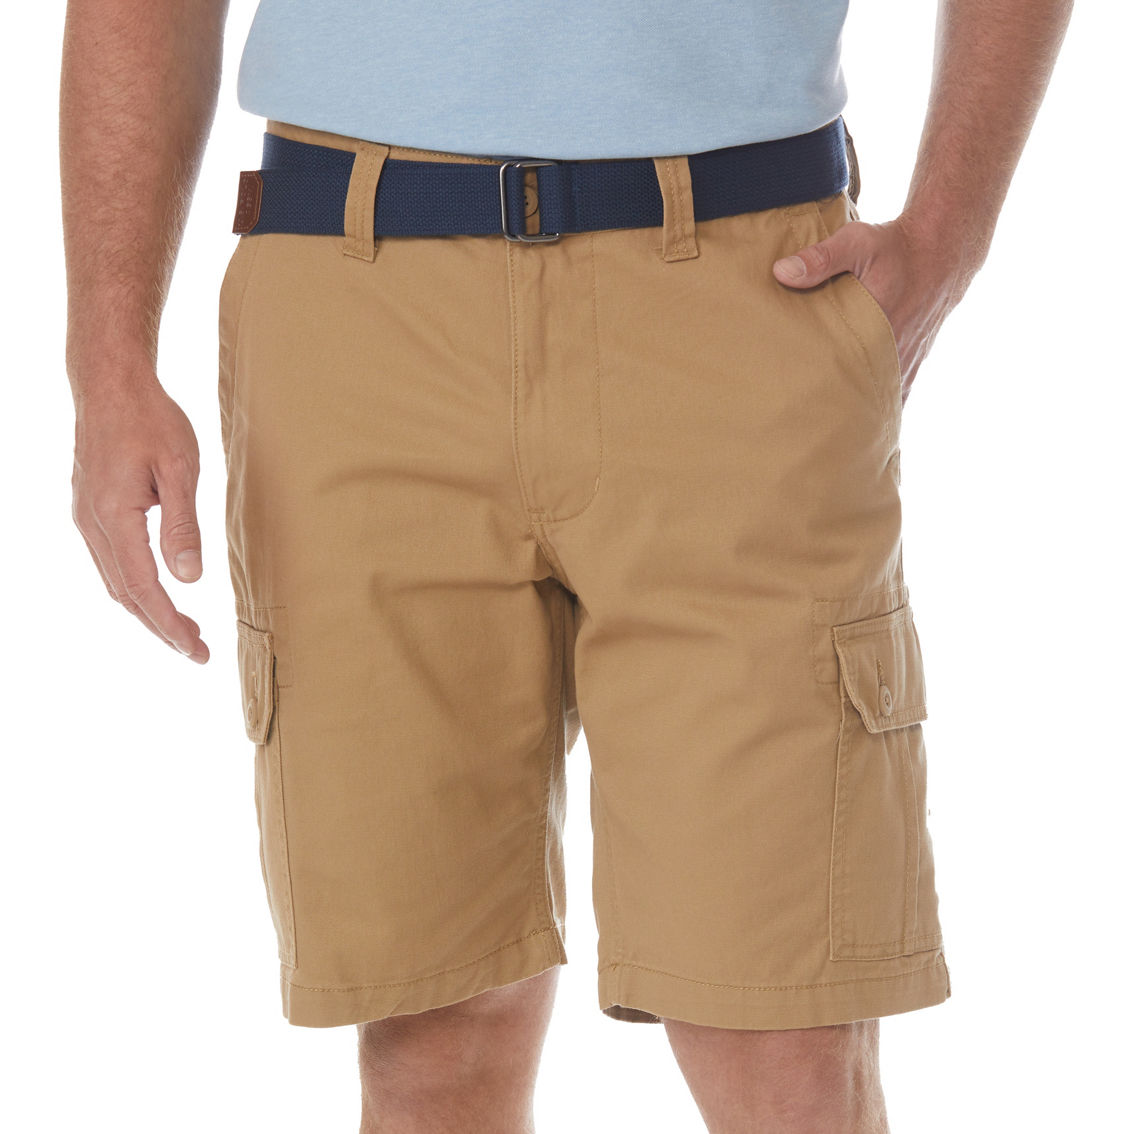 US Polo Assn Twill Belted Cargo Shorts - Image 2 of 2